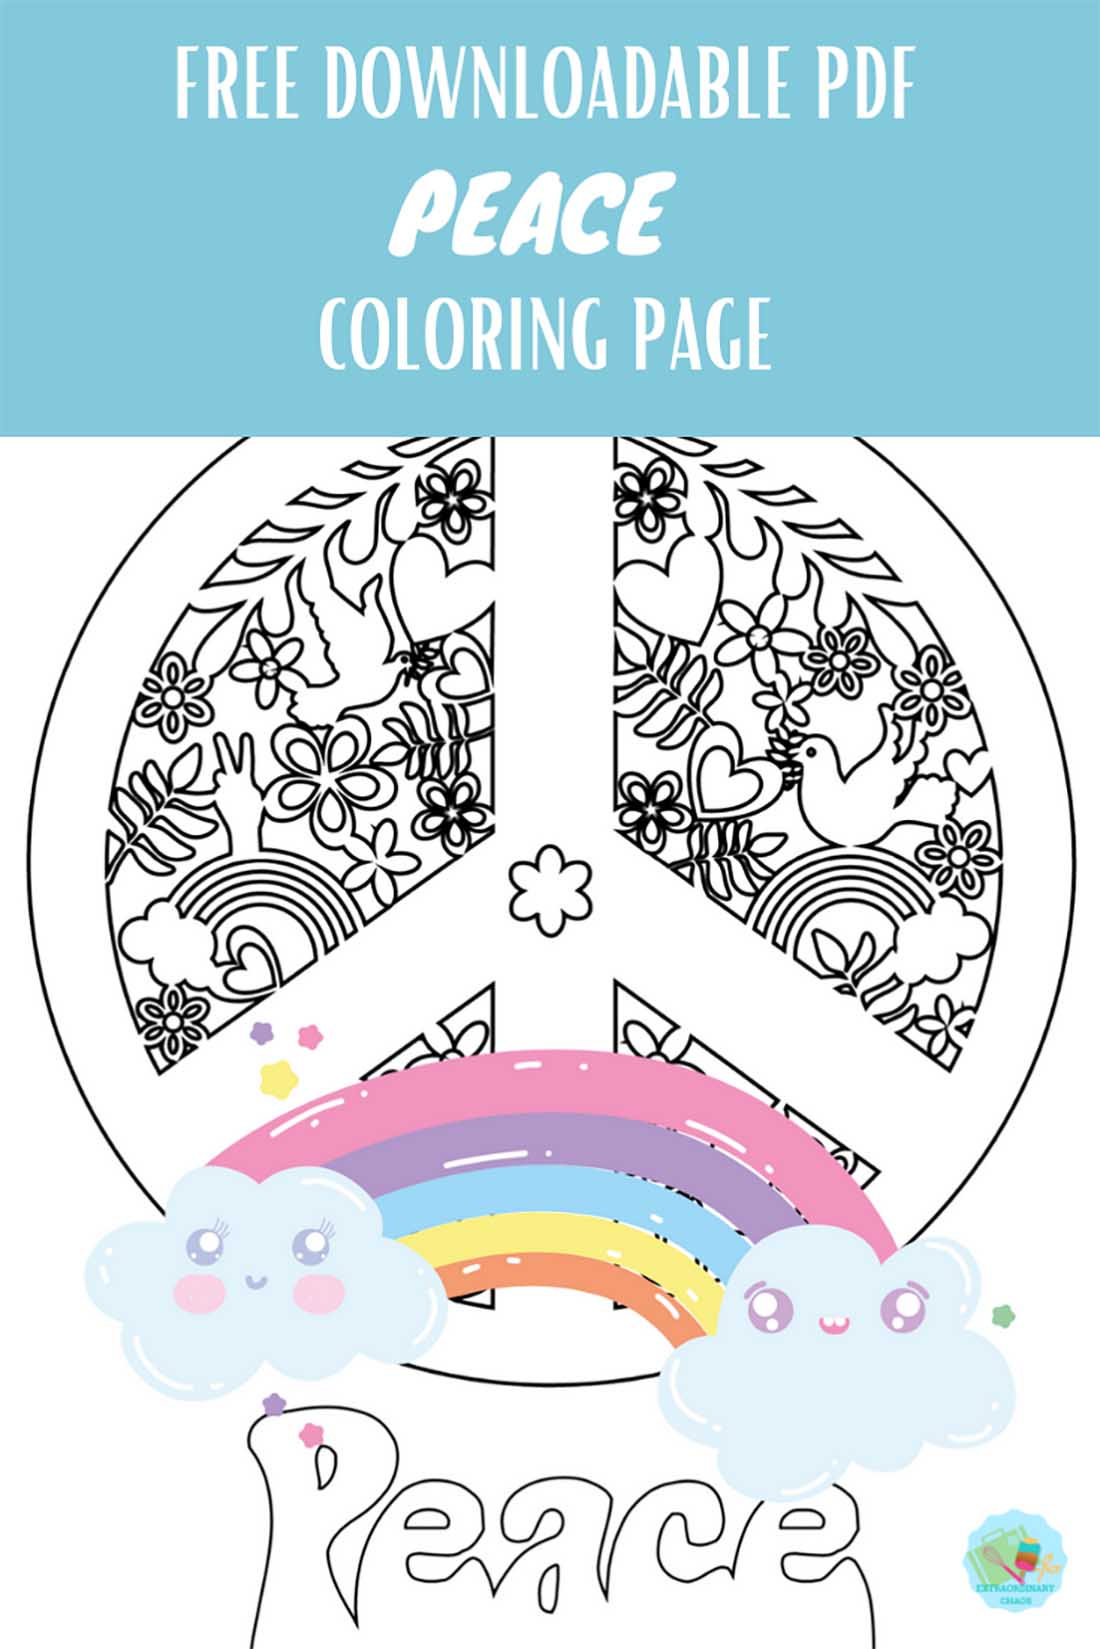 Free downloadable peace colouring page